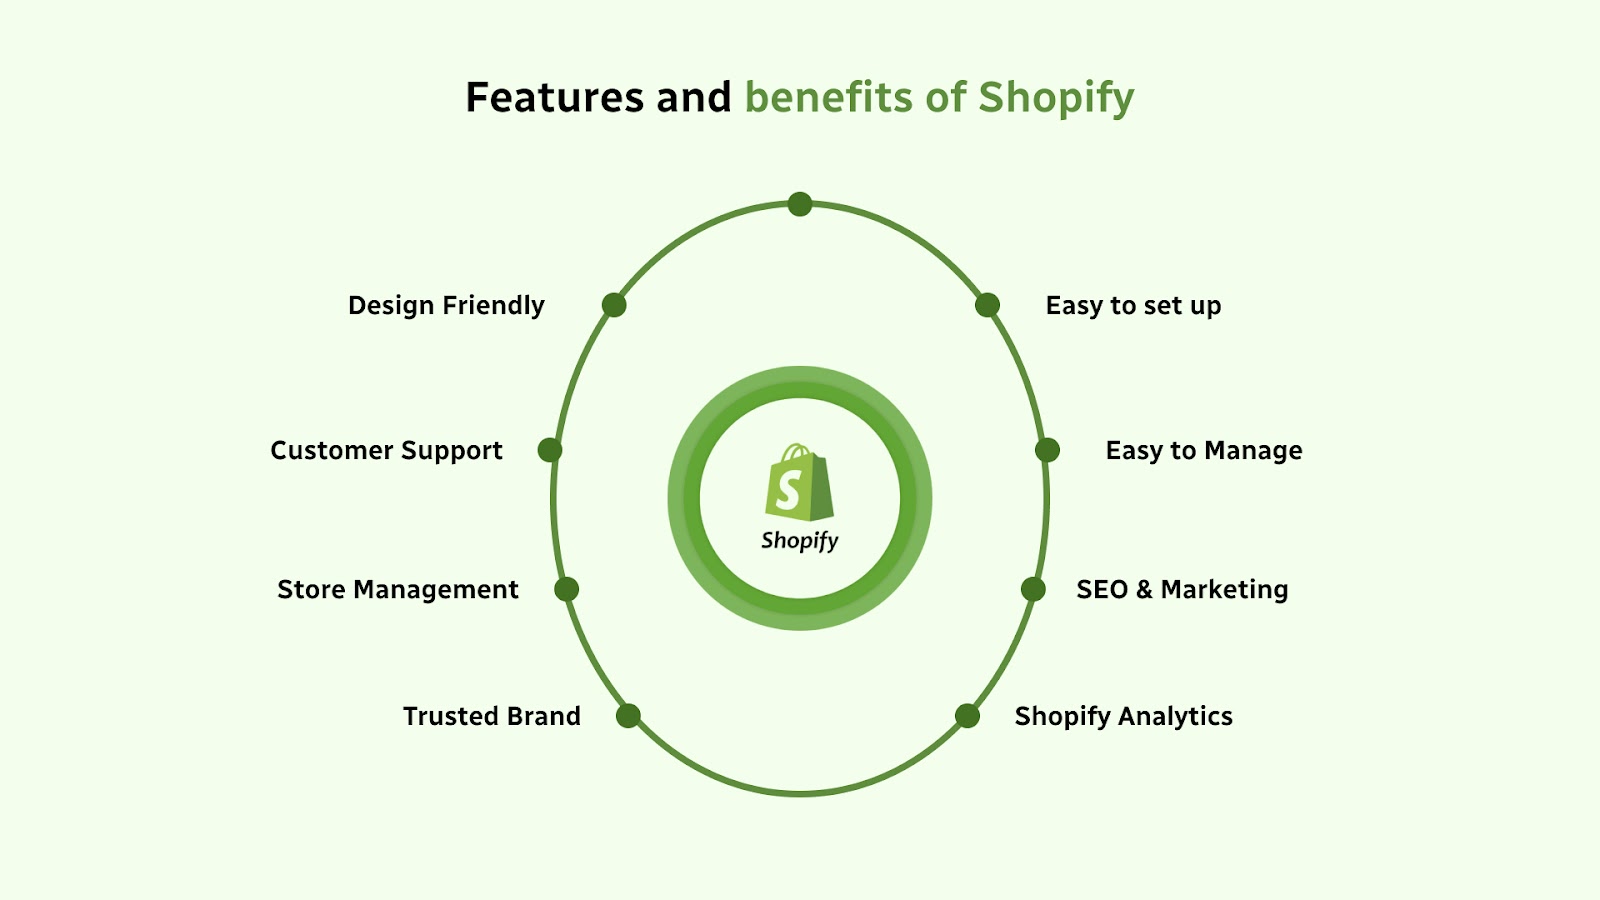 Features and benefits of Shopify